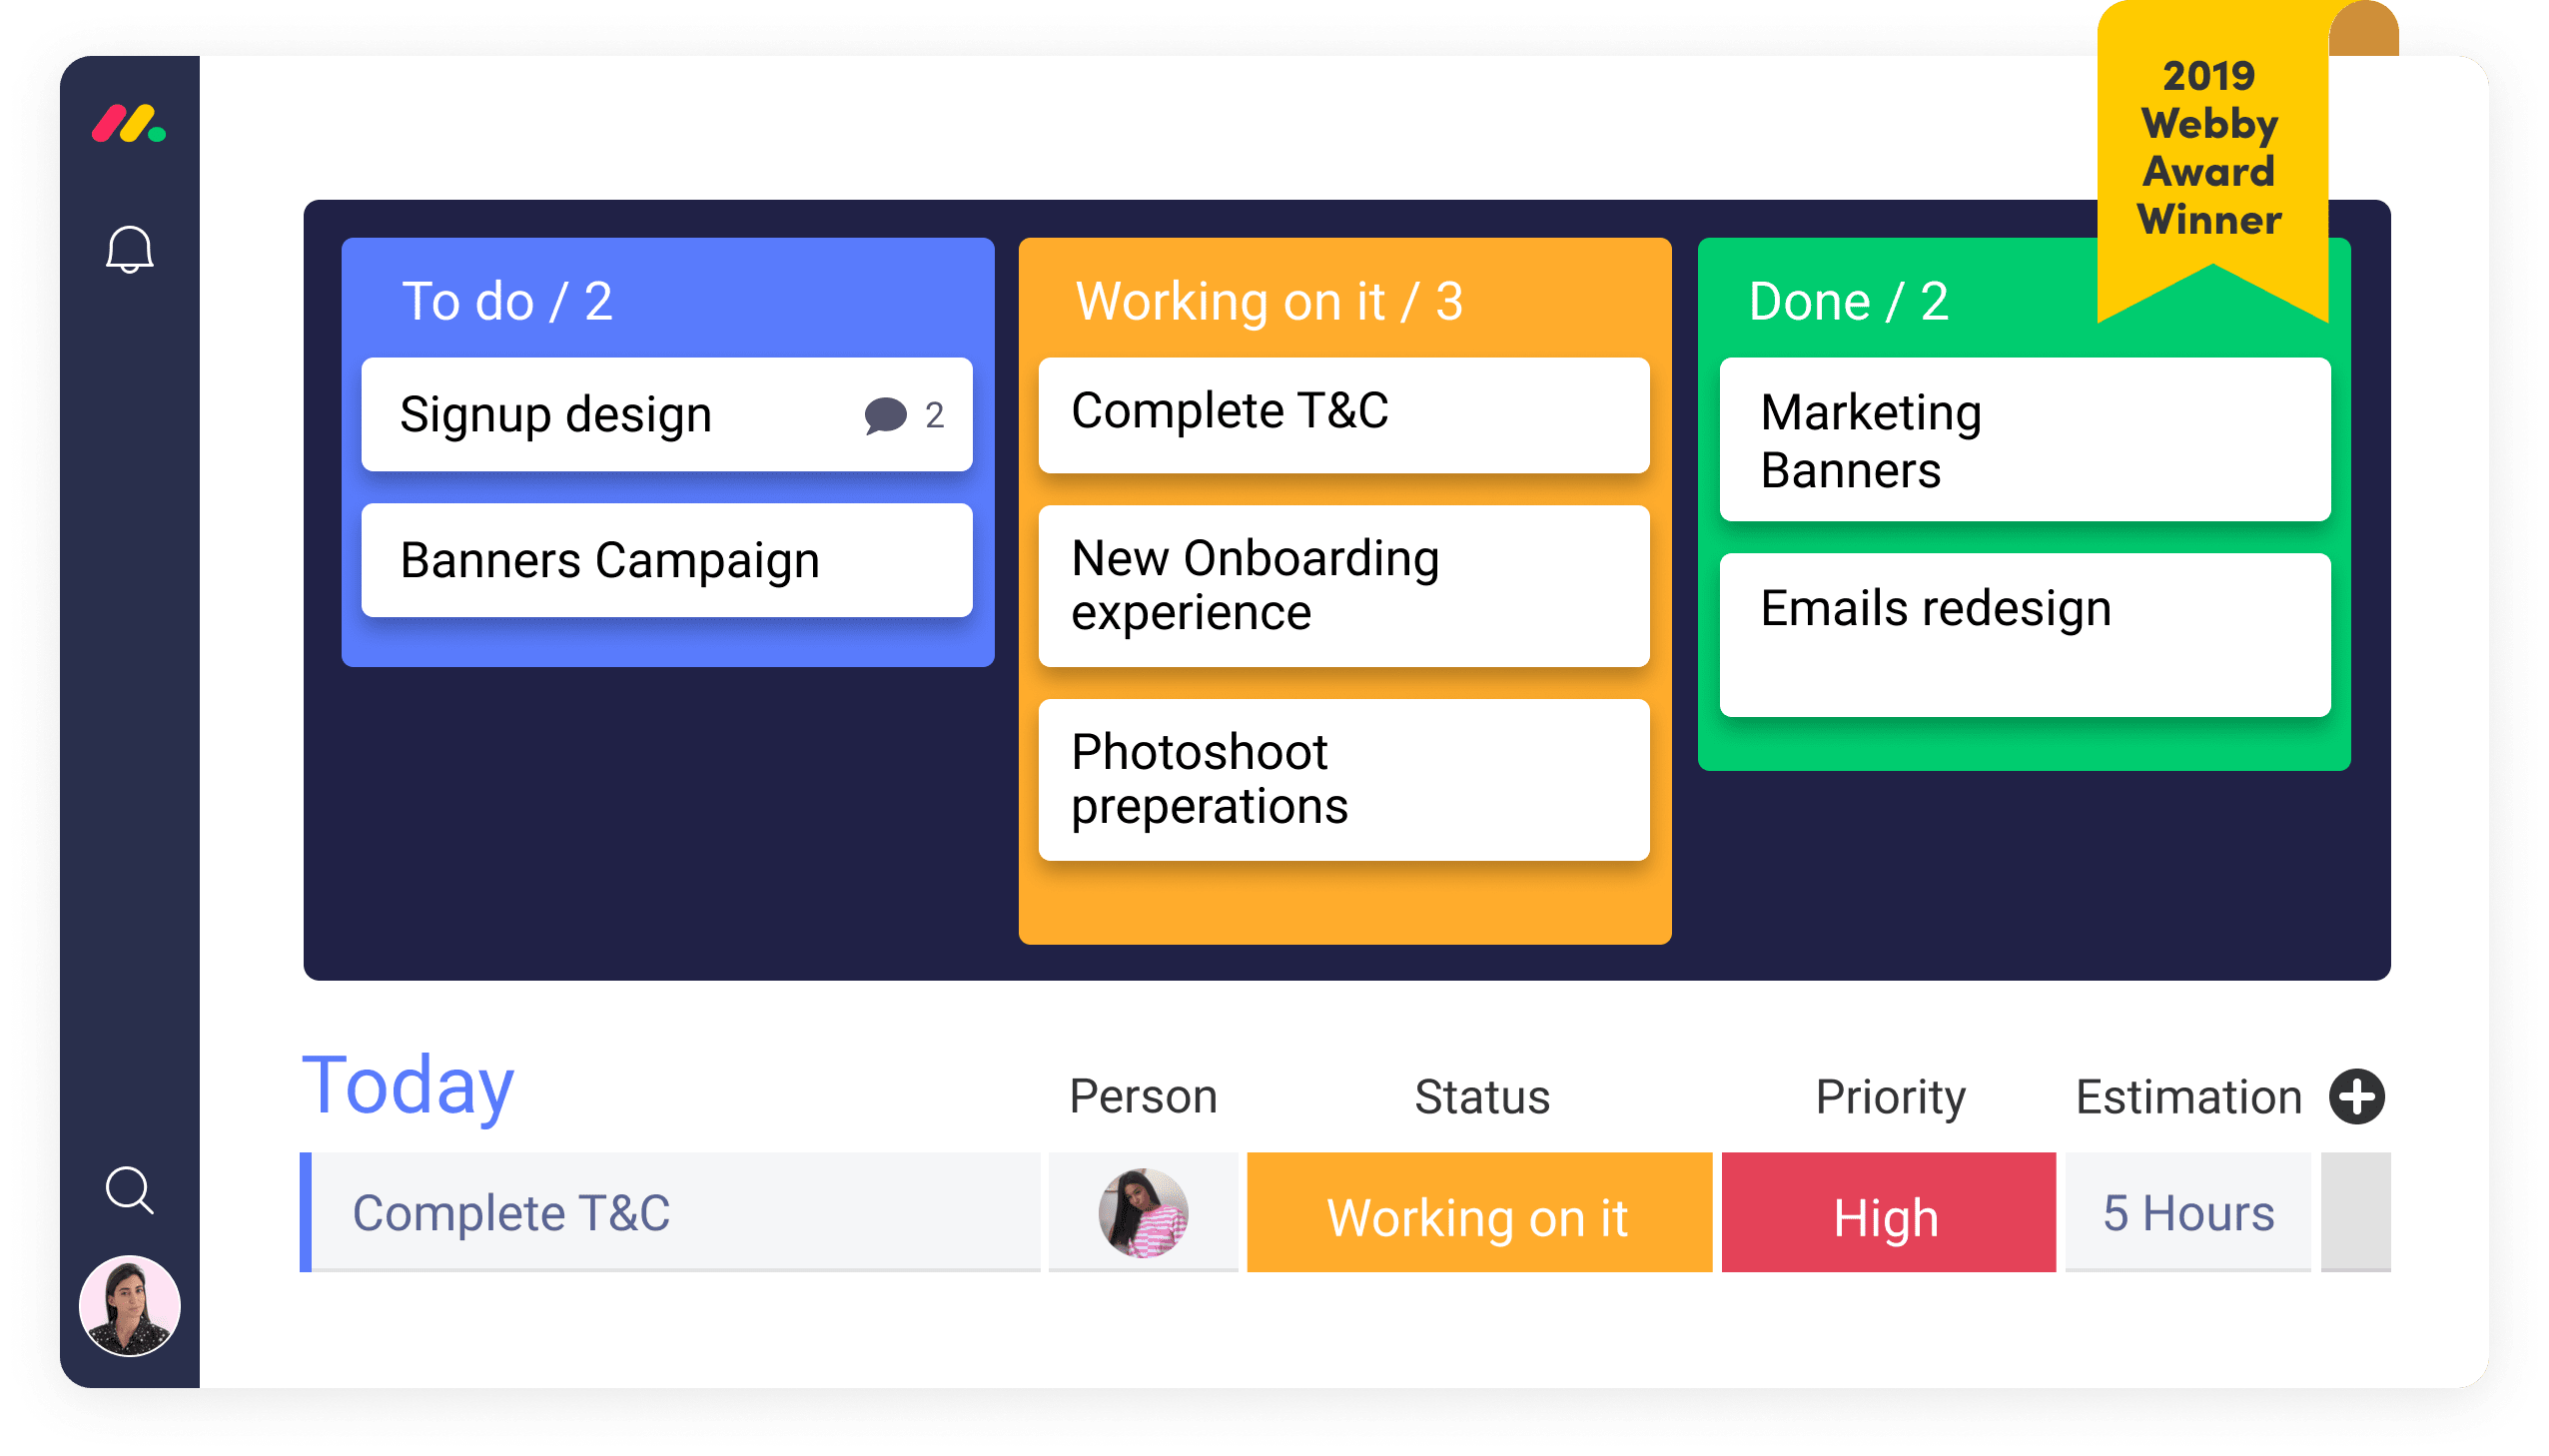 Stay organized with monday.com's lead tracking software